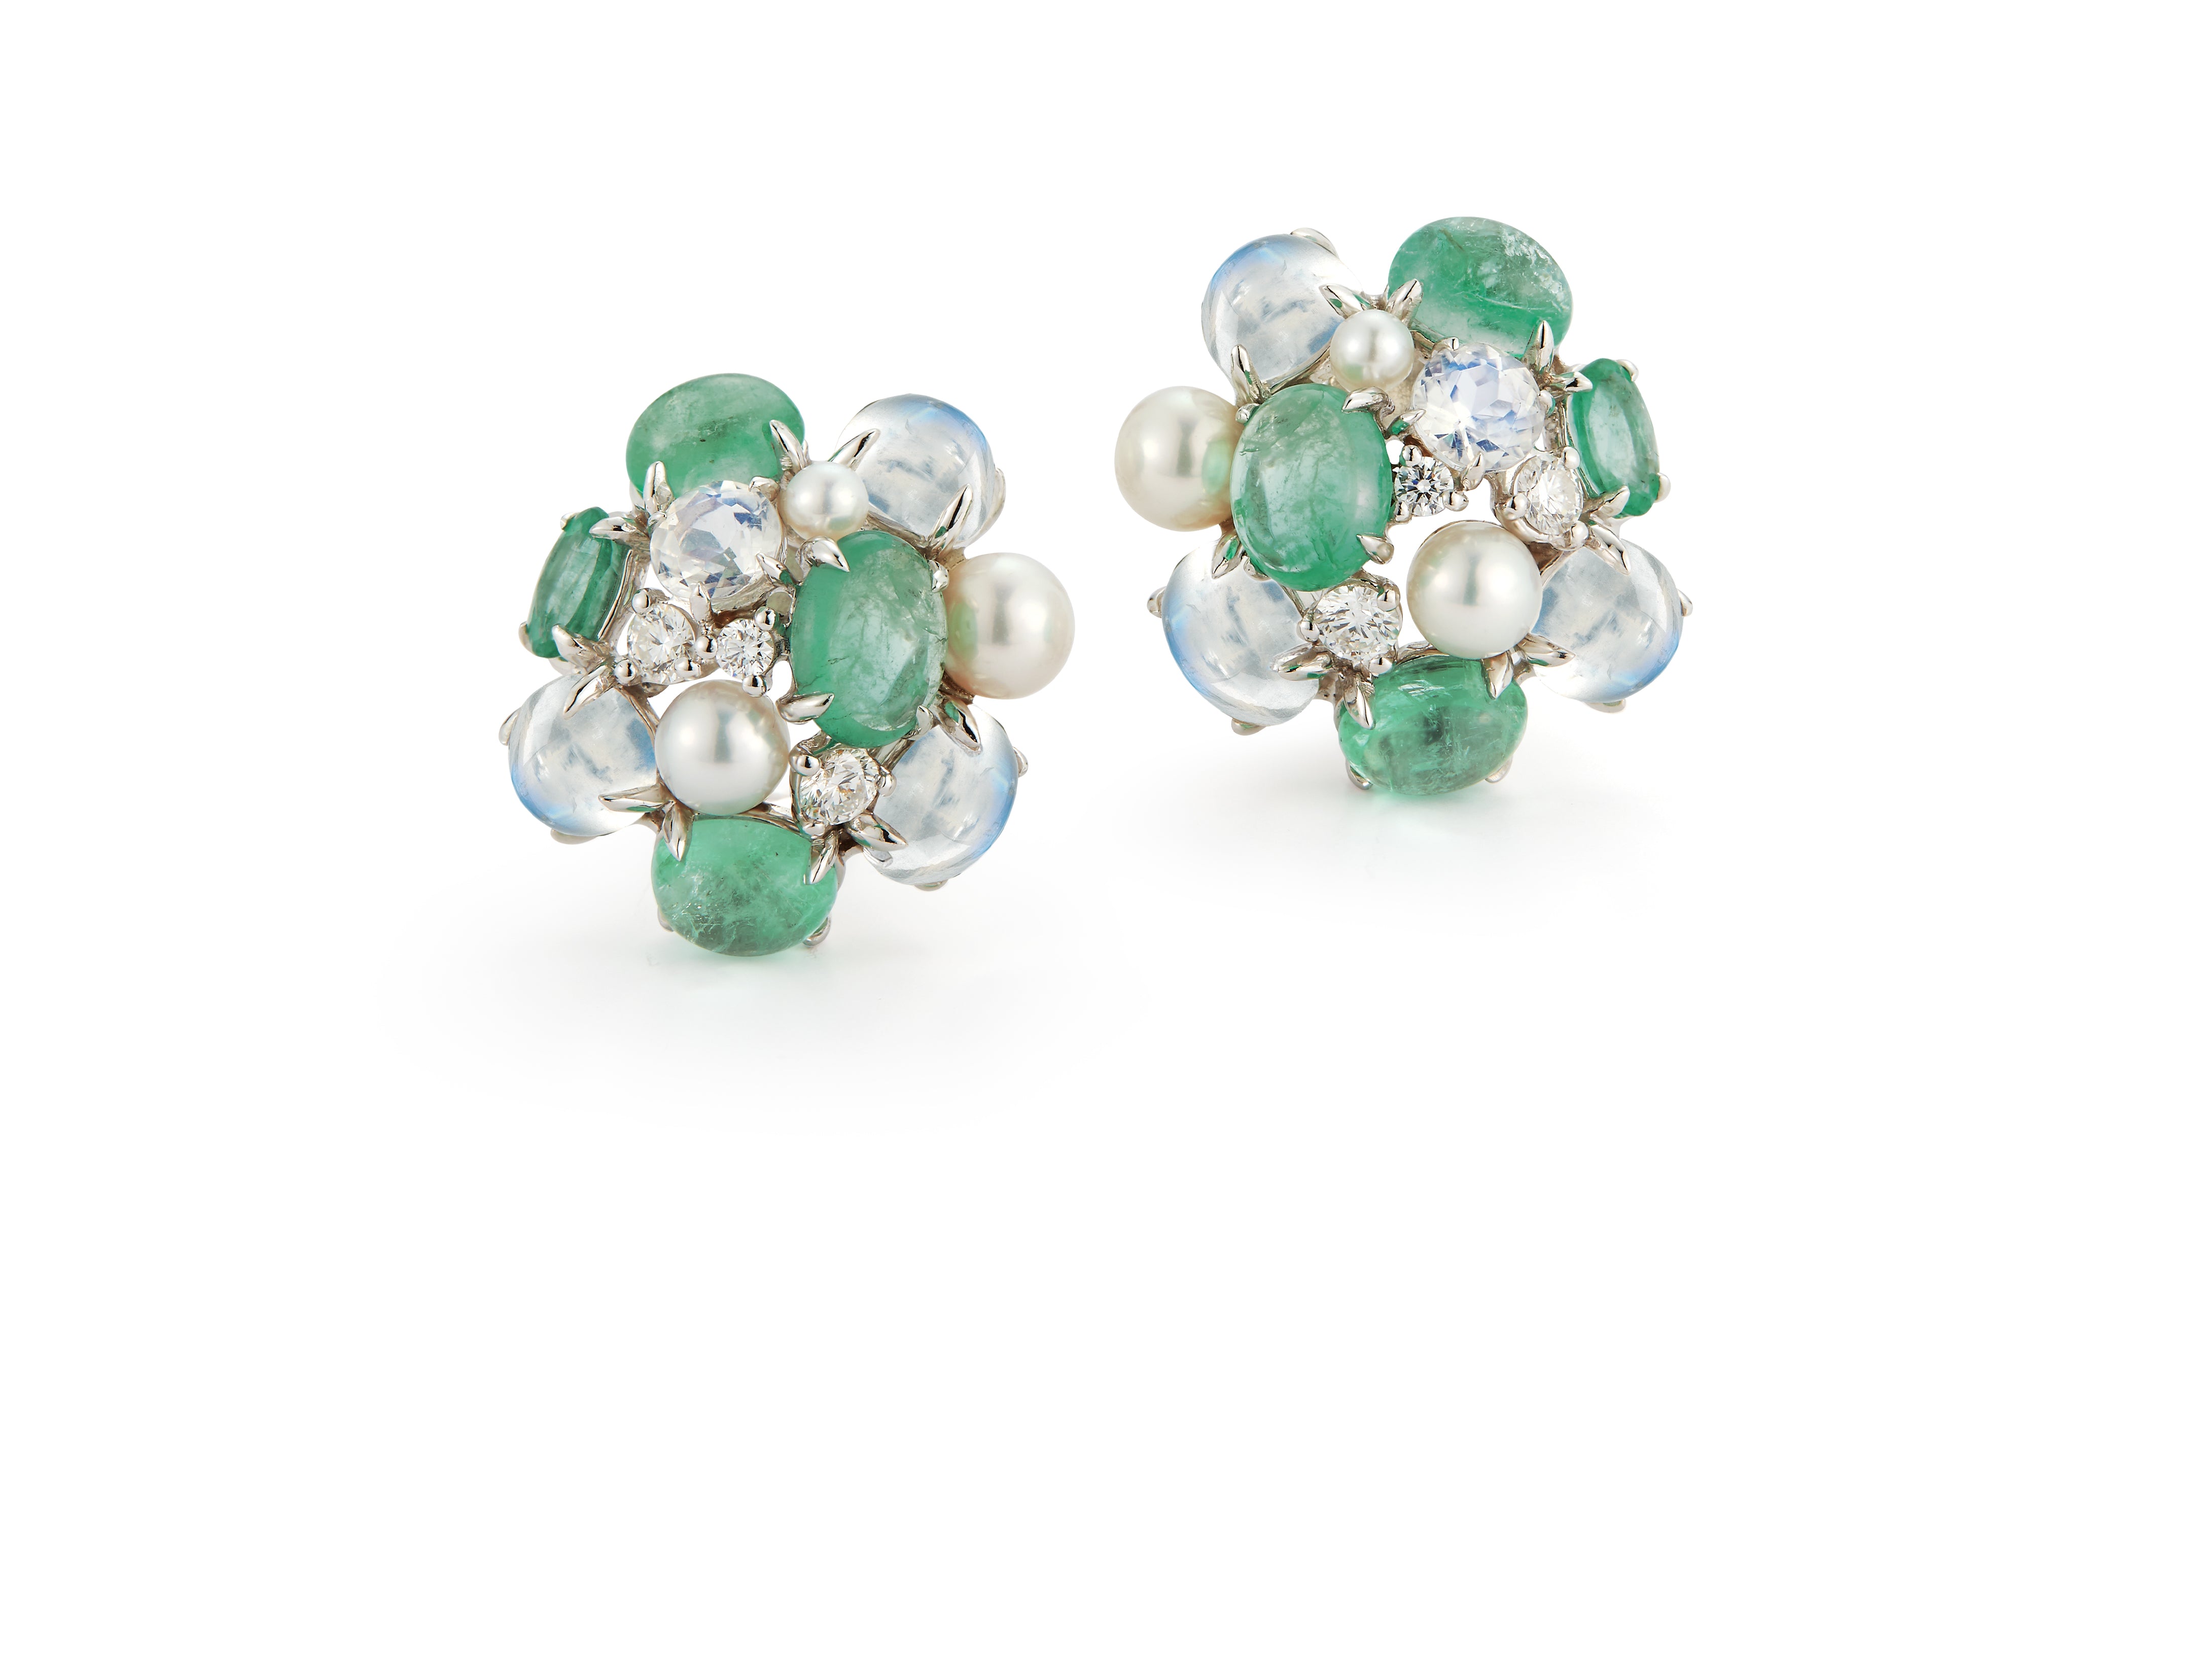 A pair of Bubble Earrings with Emerald, Pearl, and Diamond set in 18K White Gold. Signed Seaman Schepps.